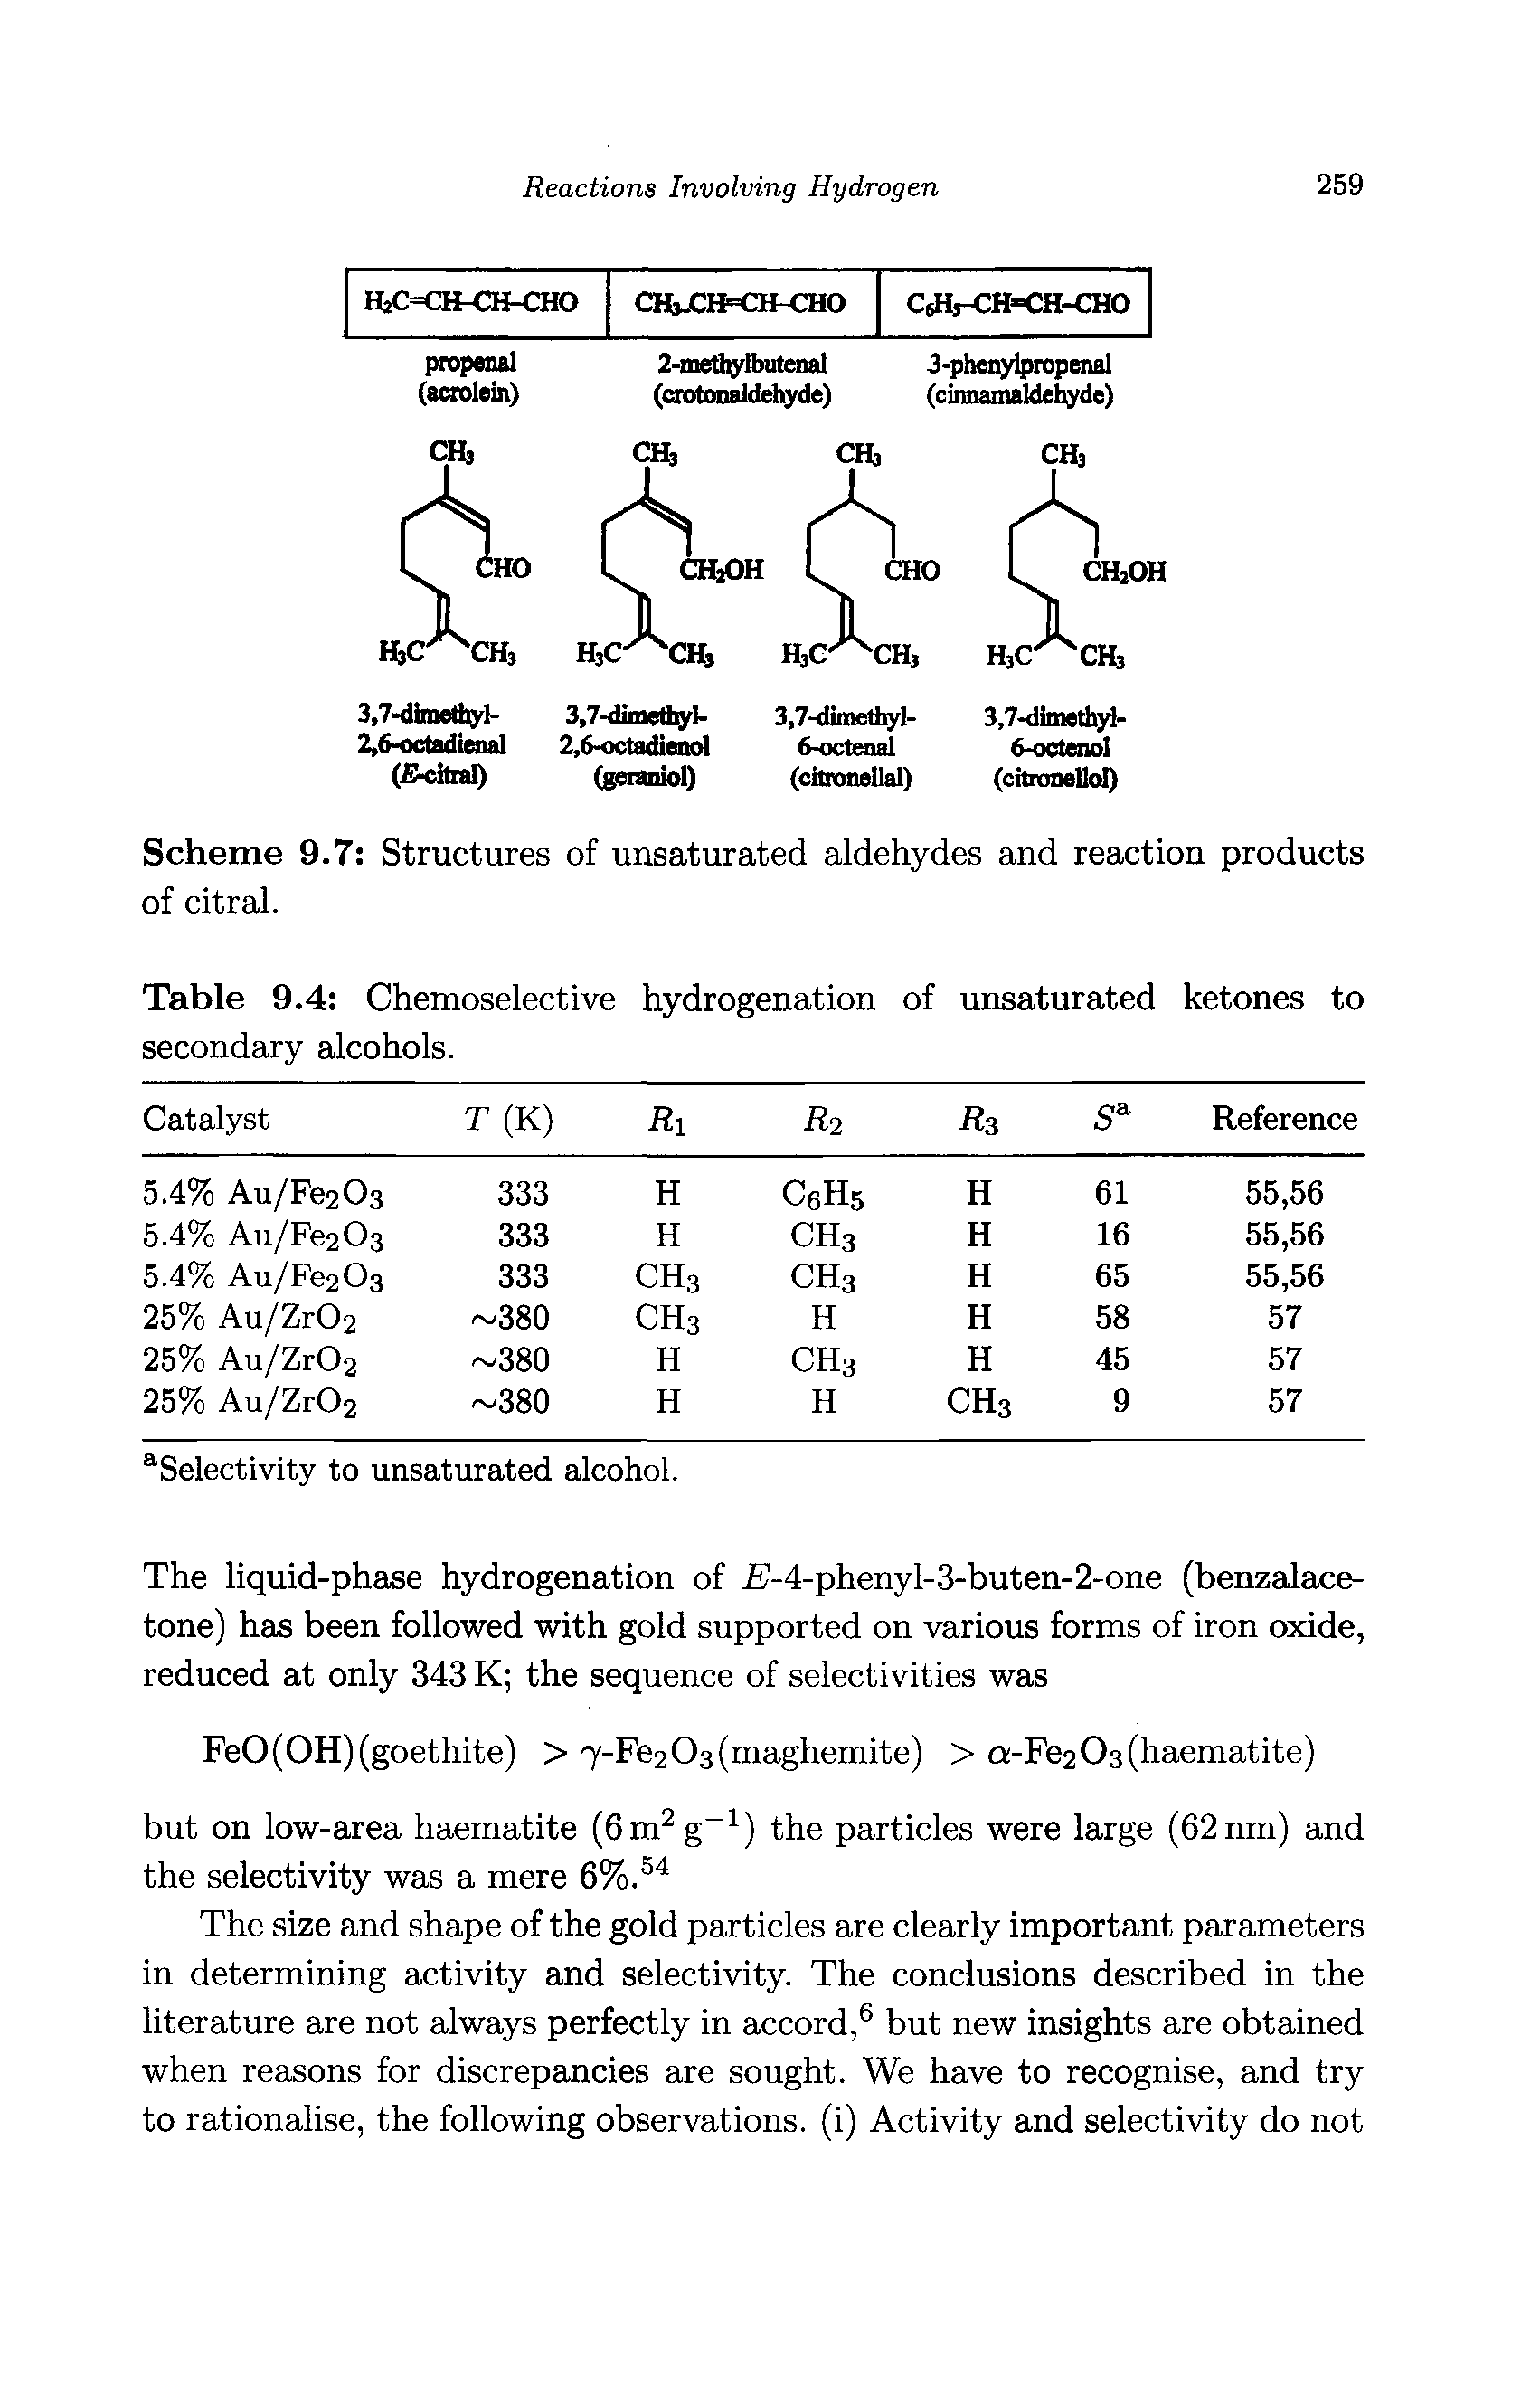 Table 9.4 Chemoselective hydrogenation of unsaturated ketones to secondary alcohols.